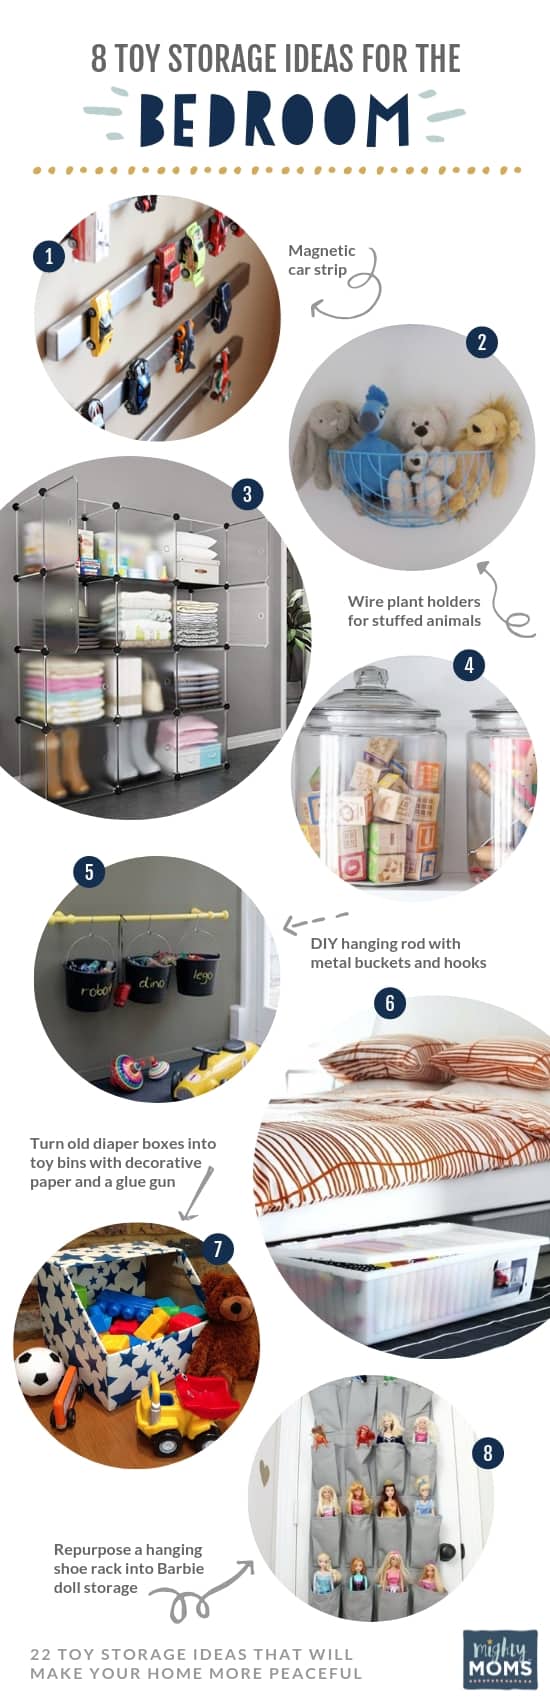 8 Toy Organization Ideas for the Bedroom - MightyMoms.club